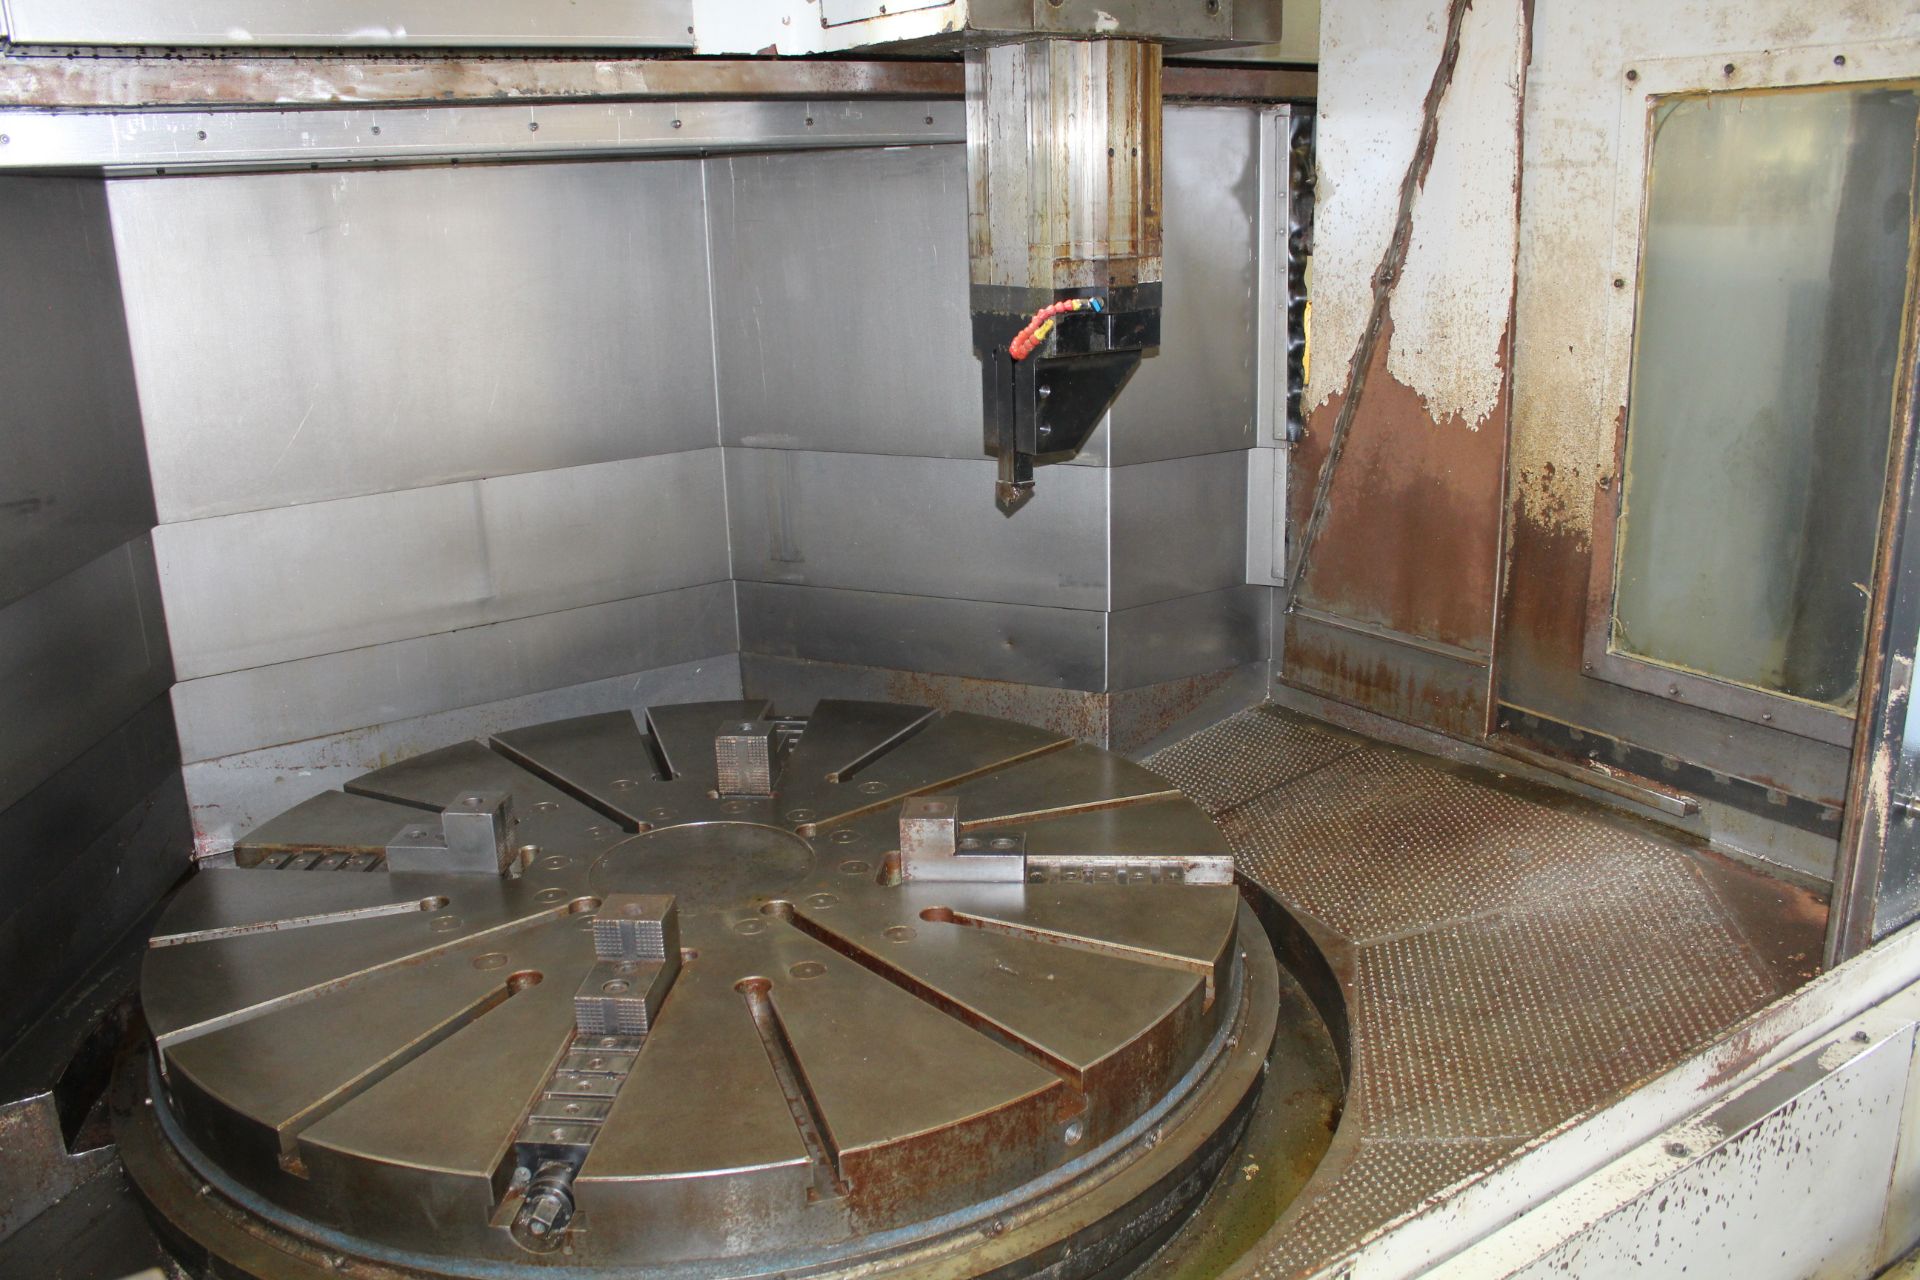 VANGUARD SMTCL GTC200160 CNC VERTICAL BORING MILL, 78" MAX TURNING DIA, 78" MAX TURNING HEIGHT, - Image 6 of 12